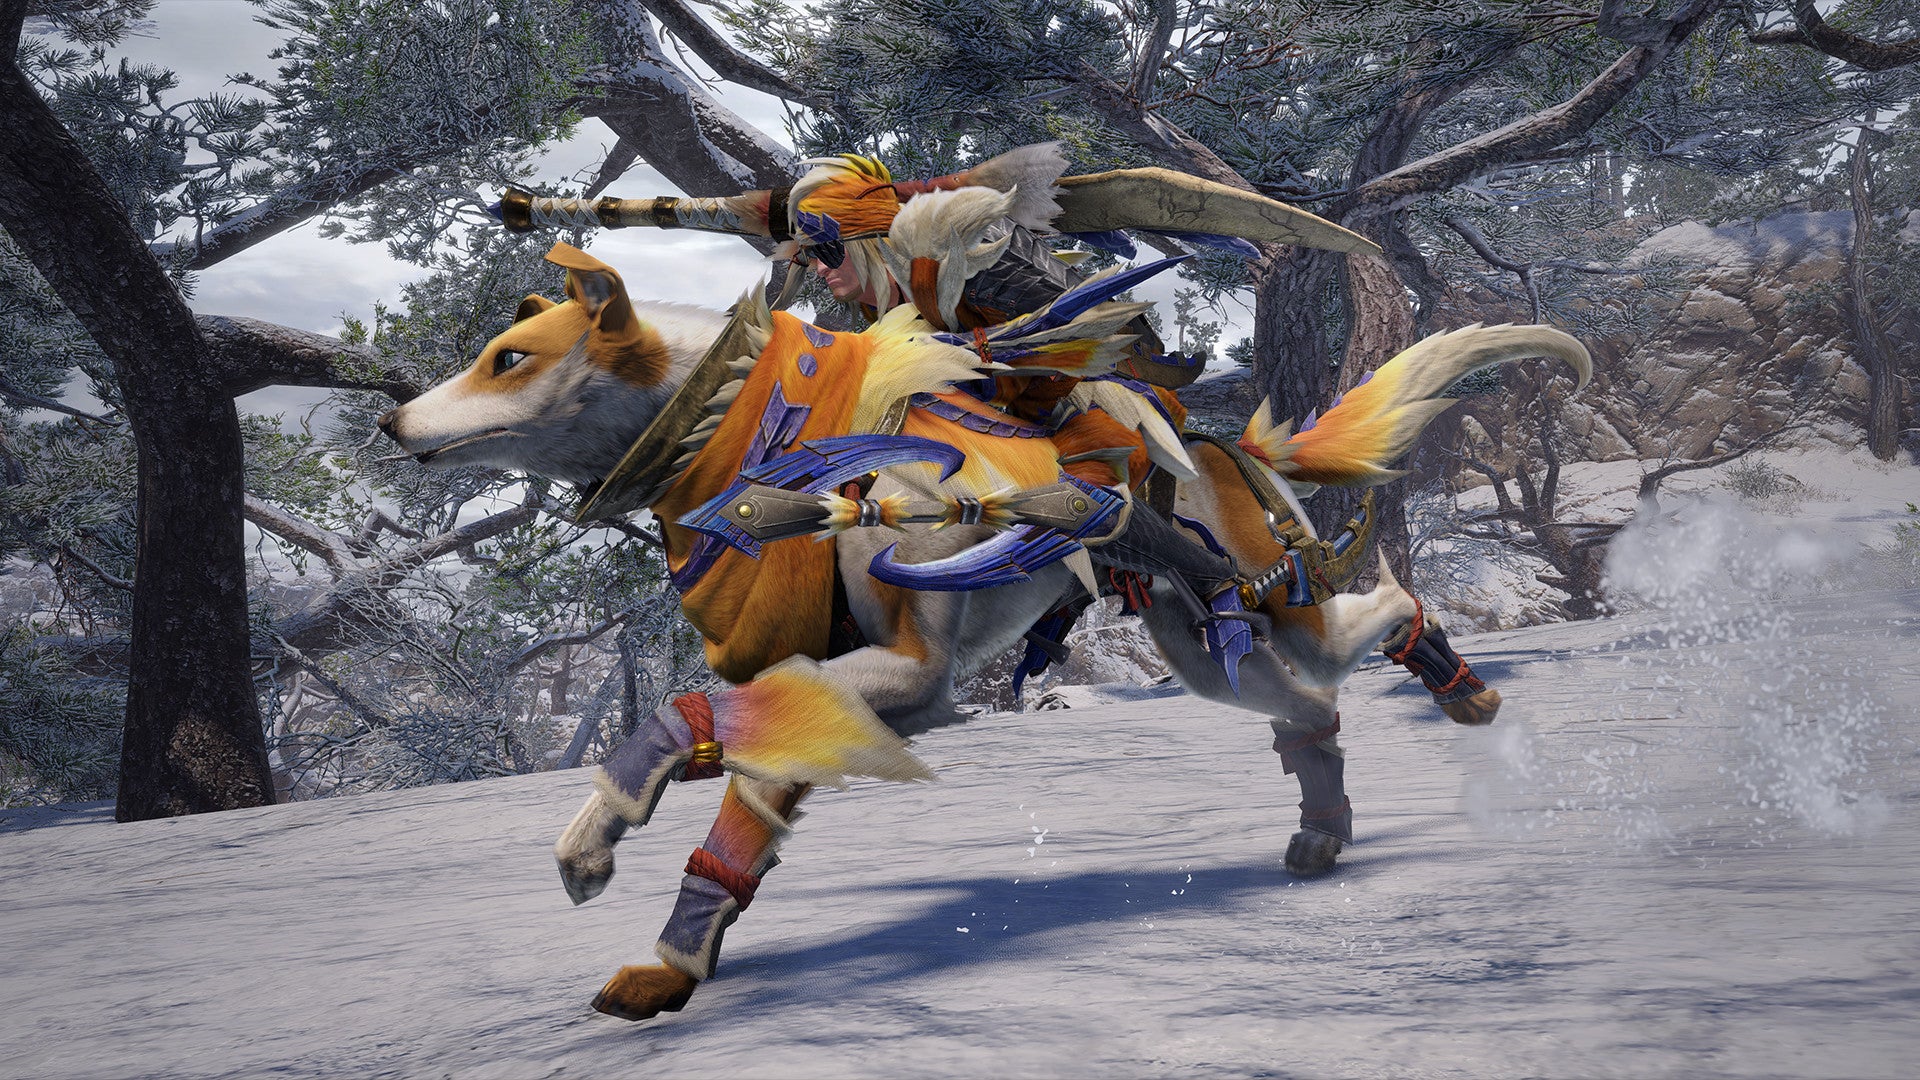 A hunter in Monster Hunter Rise riding a Palamute mount, while wearing matching armor.